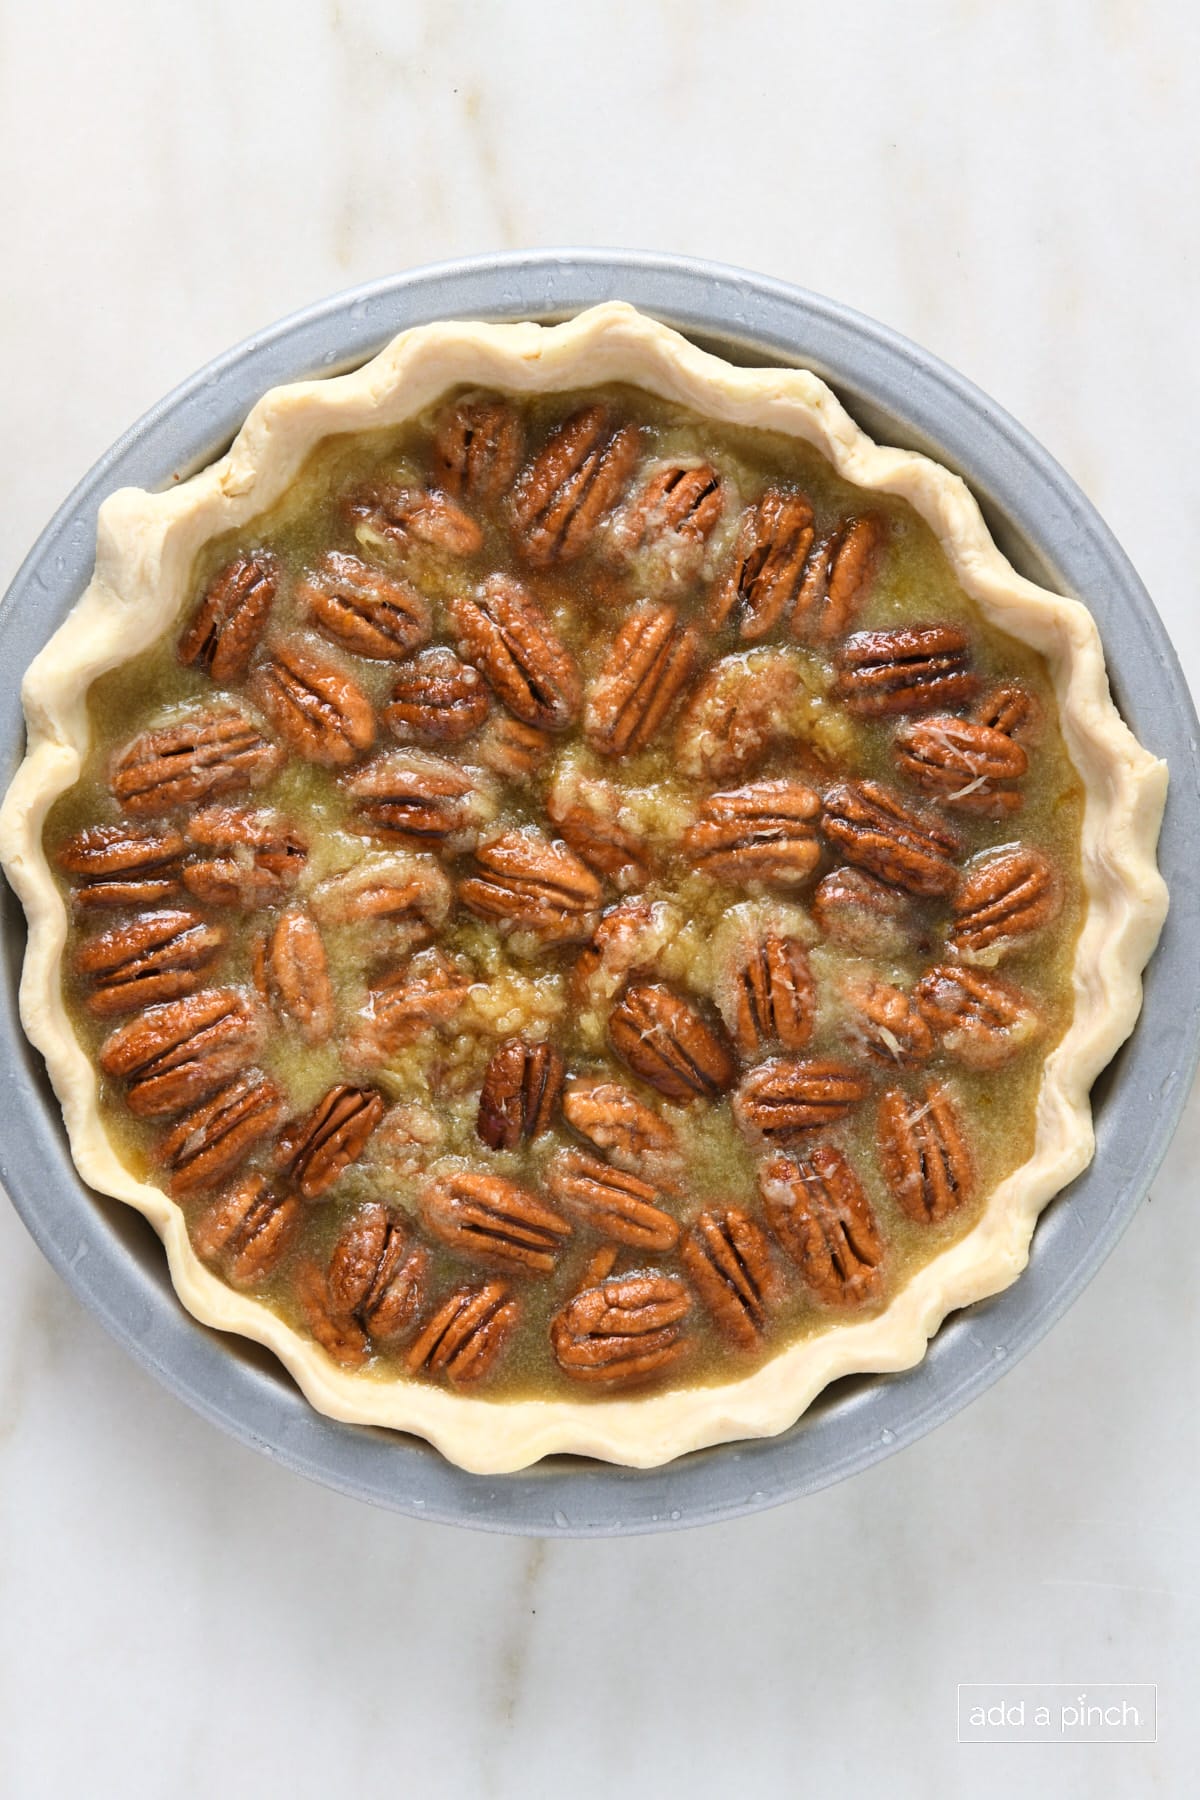 Pie plate with unbaked pie - a homemade pie crust with hand-fluted edge filled with pecan pie filling containing pecan halves. 